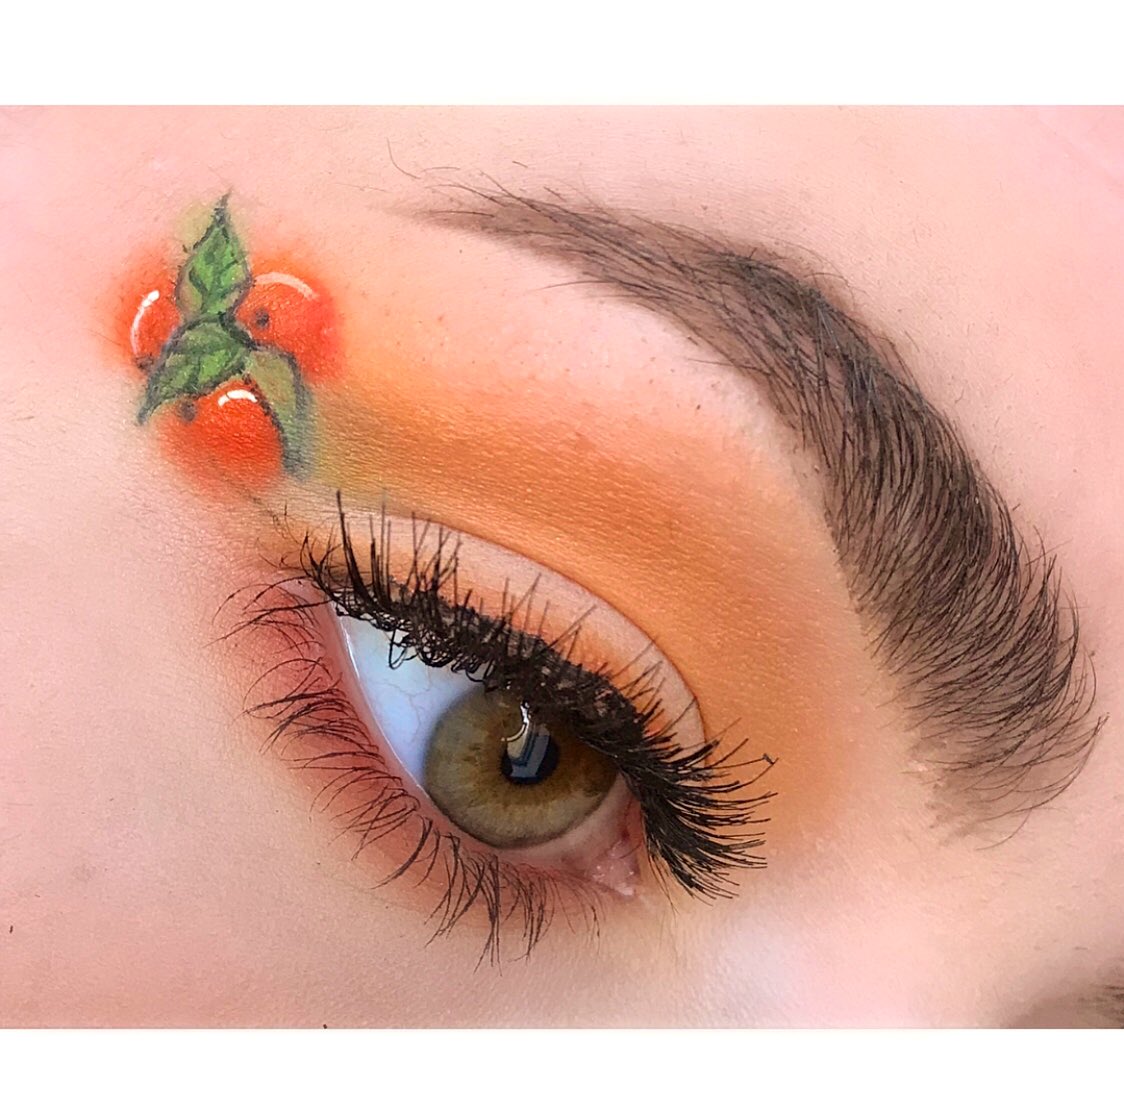 (I don’t think I ever shared these gems w/ Twitter) 
•
•
just you and me, sitting by the orange trees 🌳🍊
•
•
•
Inspired by: @MarinaDiamandis 
#undiscovered_muas  #theartistedit #creativemakeup #myartistcommunity 
#springmakeup #mua #wakeupandmakeup #muasfeaturing